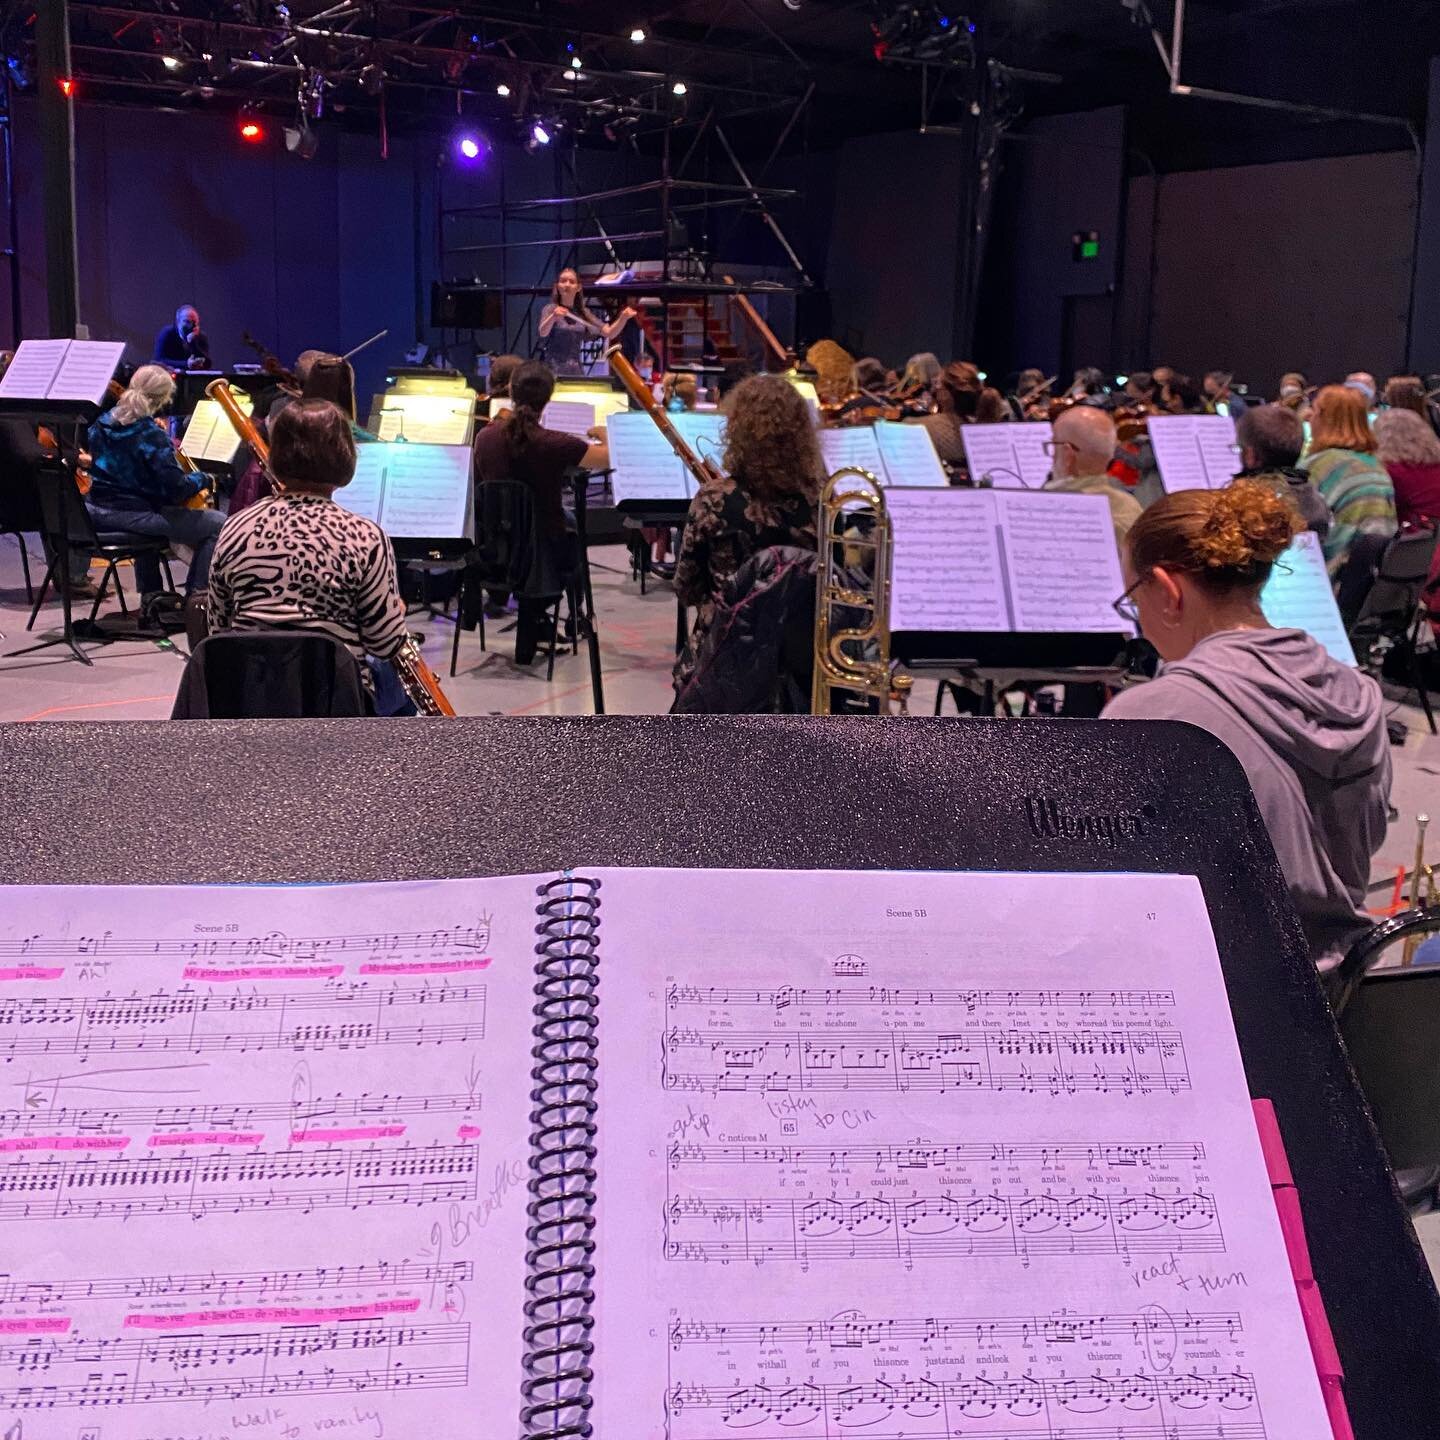 Yesterday I got to sing with full orchestra for the first time since February 2020. Feeling my voice soar over the incredible sound of the @operasanjose orchestra, seeing such an inspiring young woman @alma_deutscher conduct her own composition and b